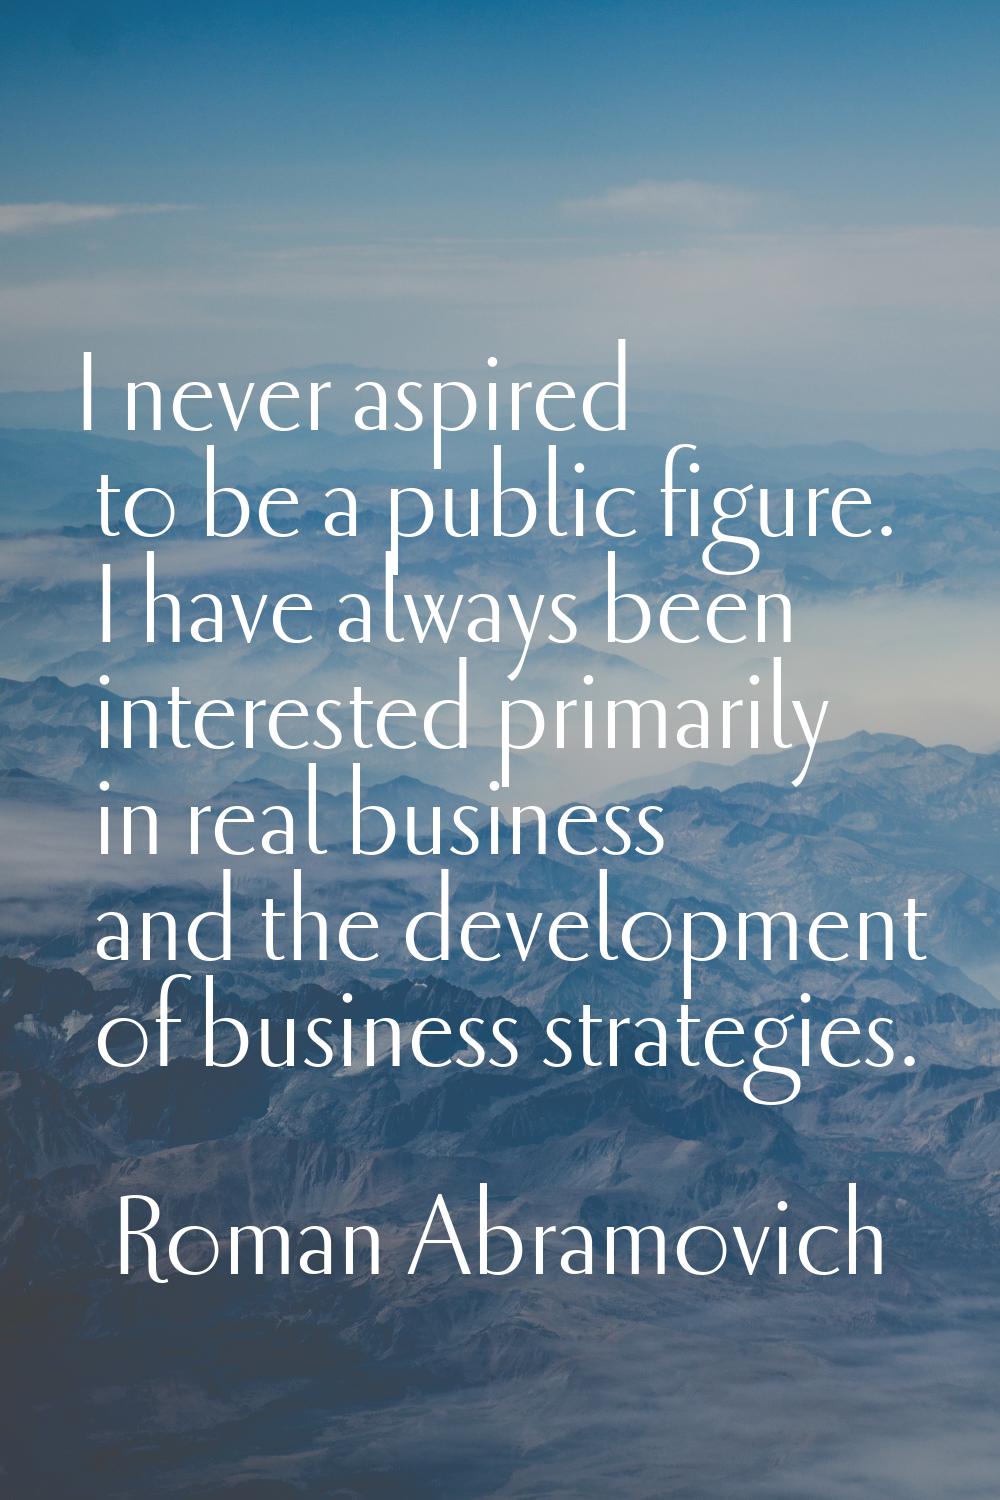 I never aspired to be a public figure. I have always been interested primarily in real business and